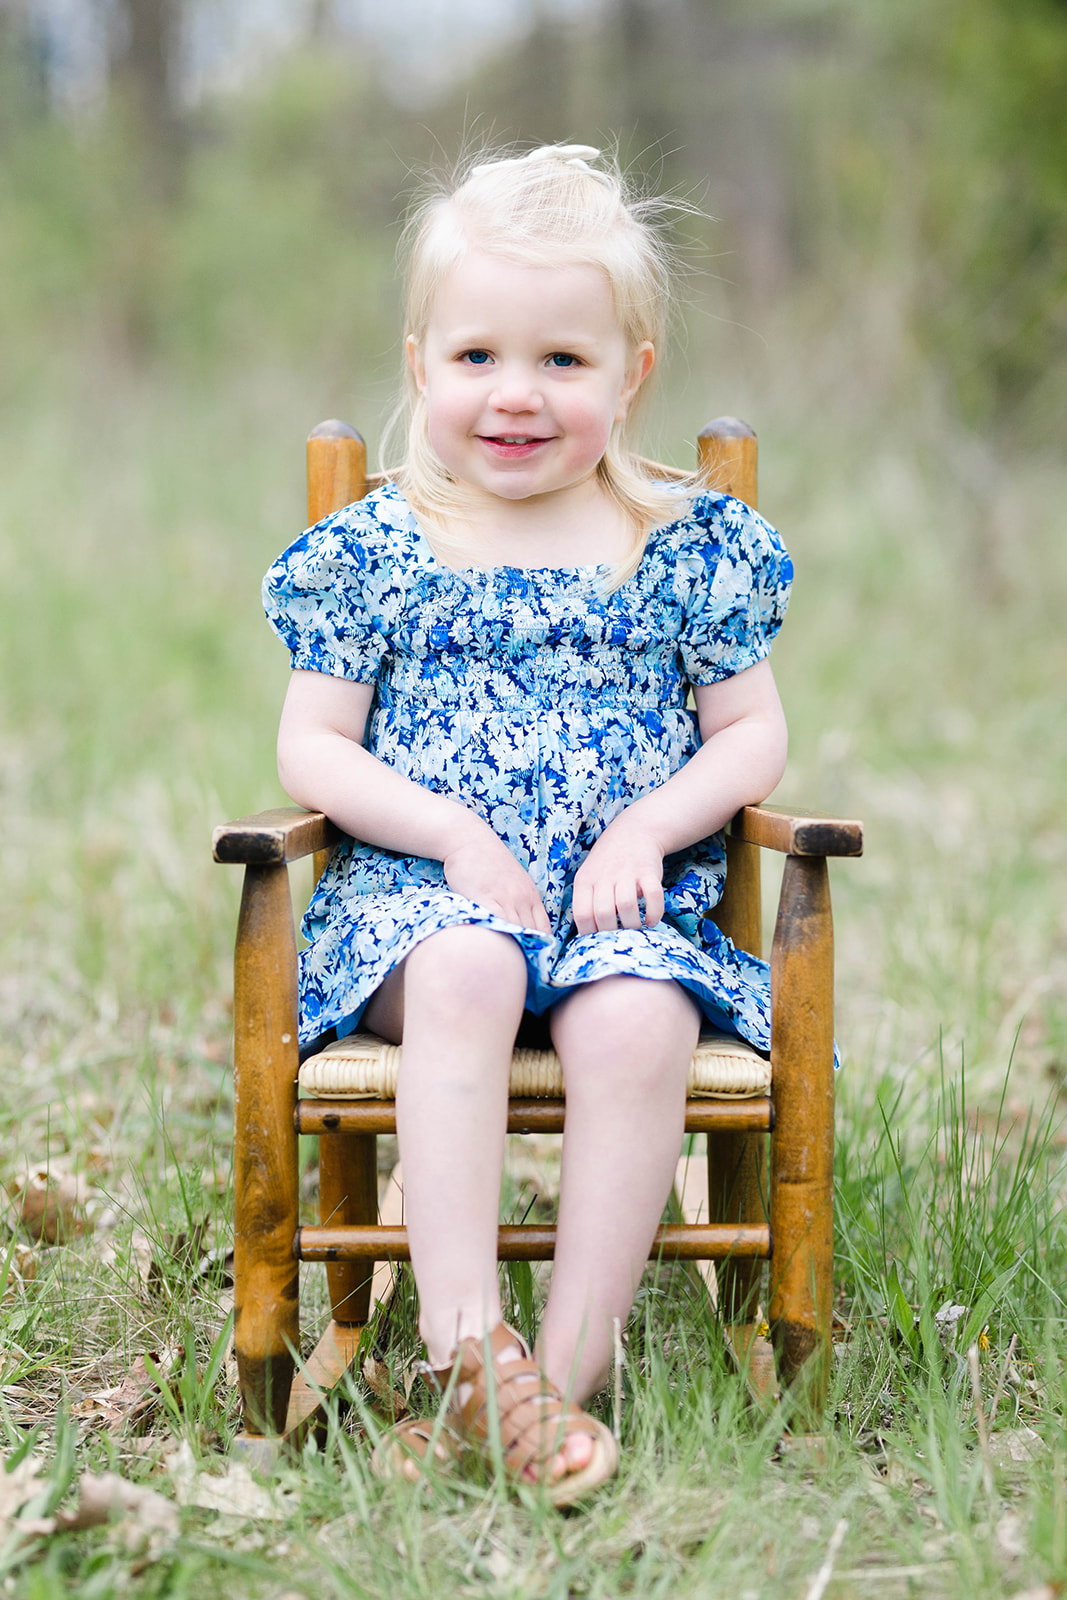 A young girl sits in an antique wooden rocking chair in a grassy field in a blue dress Baby Stores in Columbus Oh